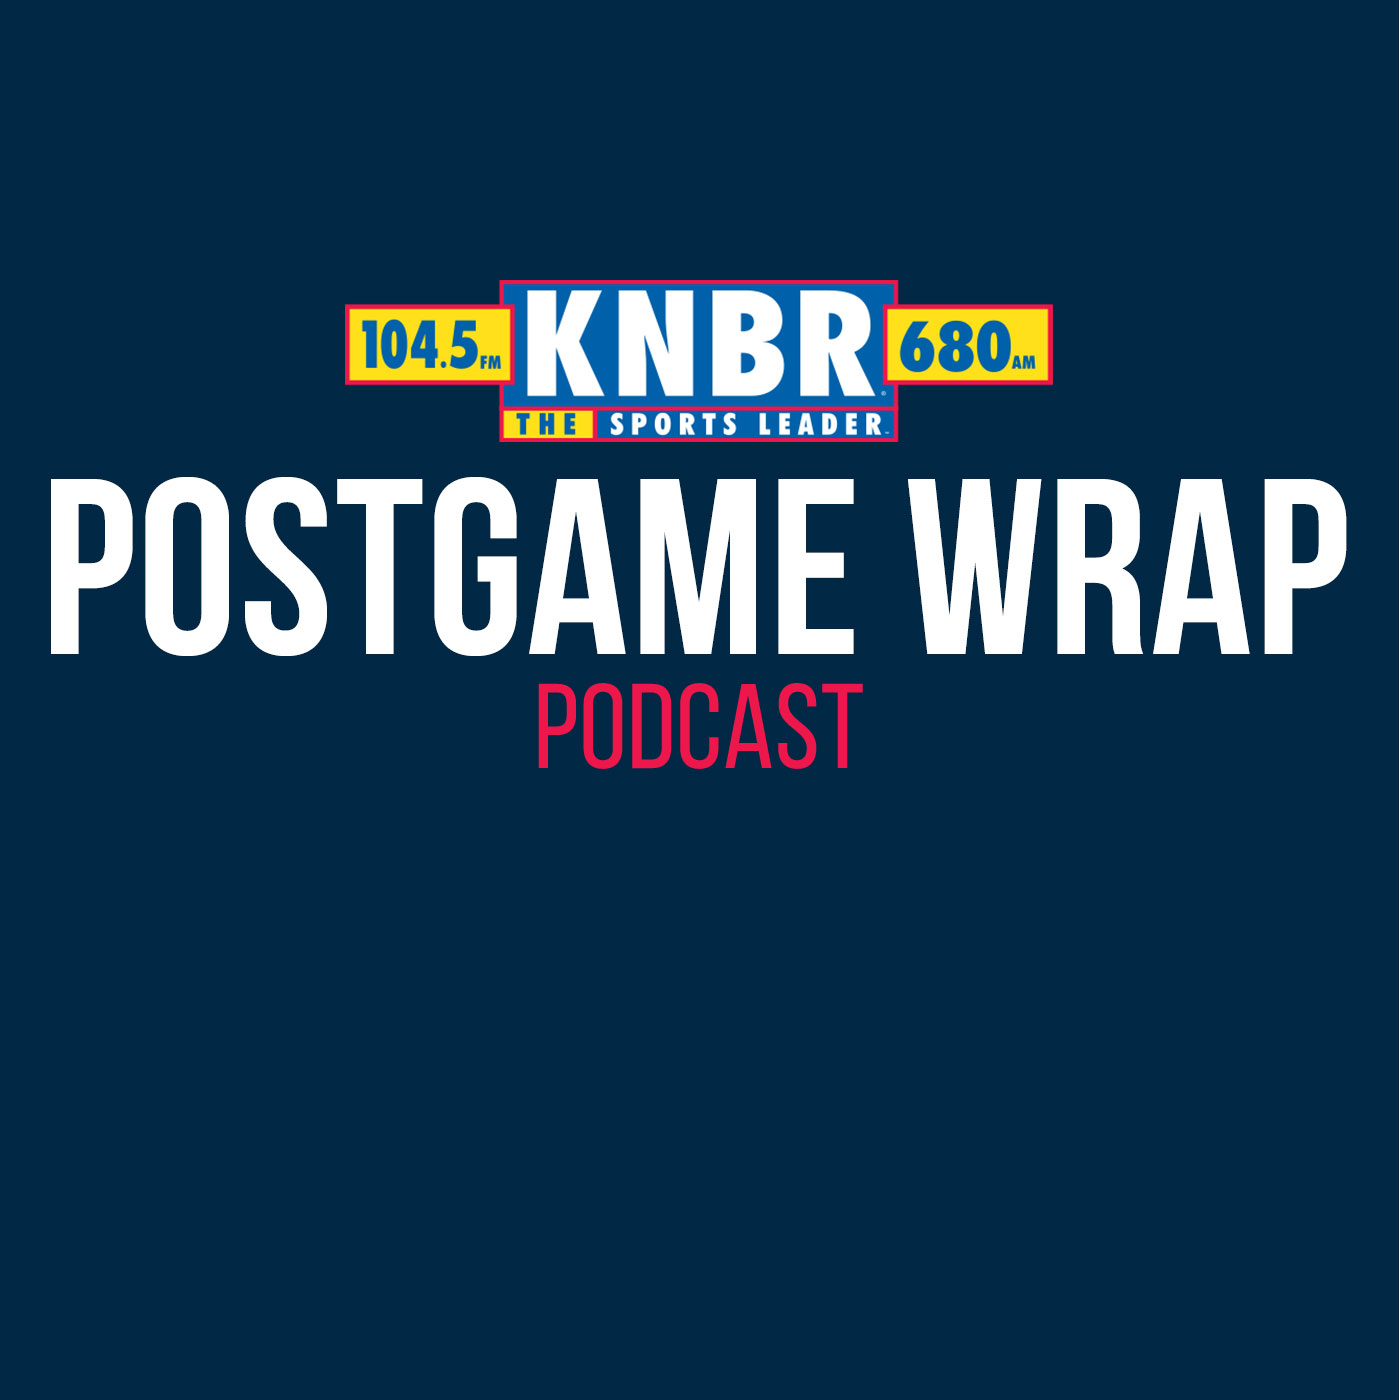 7-17 Postgame Wrap: Giants 4 Reds 2